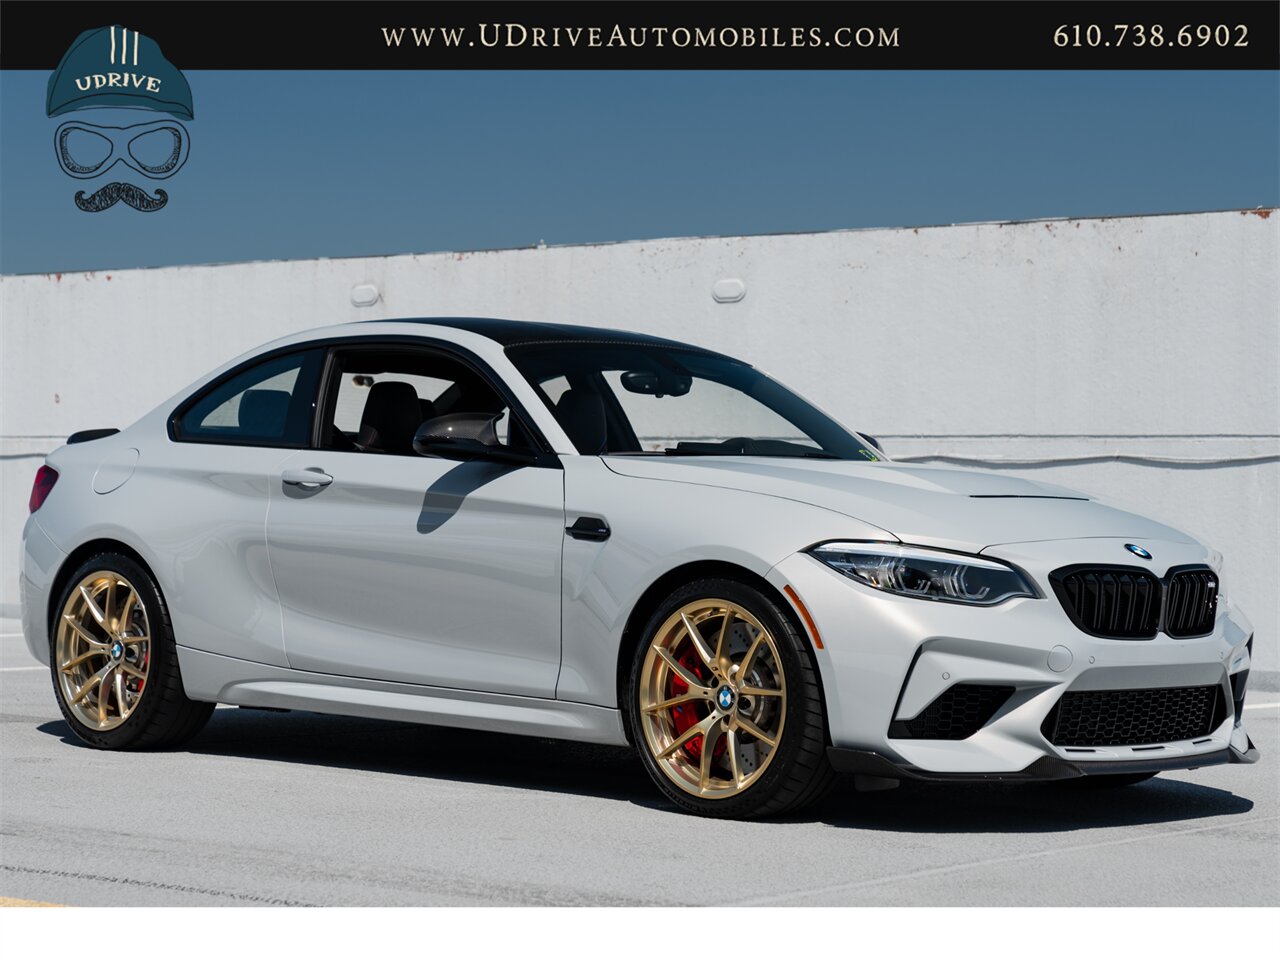 2020 BMW M2 CS  M2 CS 6 Speed Manual 2k Miles Full Body PPF Factory Warranty until 2025 - Photo 14 - West Chester, PA 19382